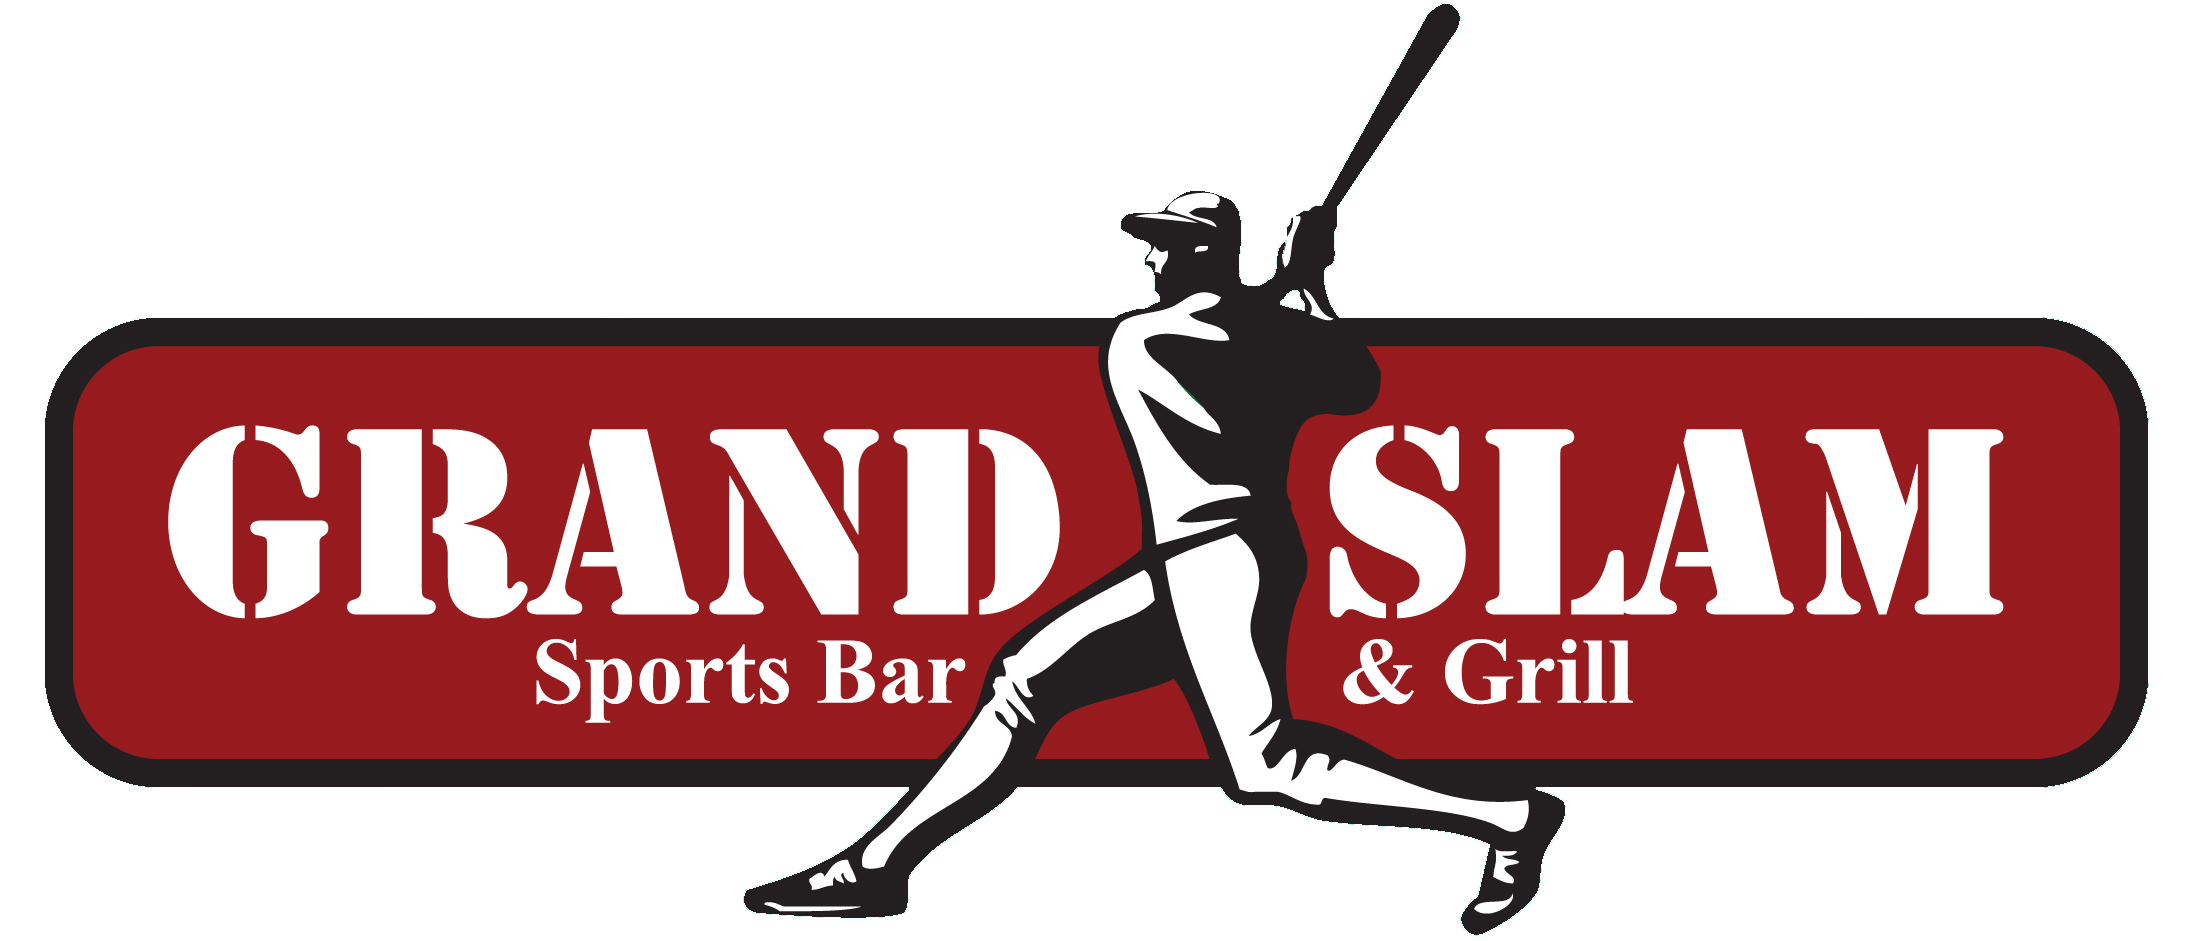 Grand Slam Sports Bar & Grill - Bastion Tactical Mag Floor Plate Laser Engraved Magazine (2193x941)